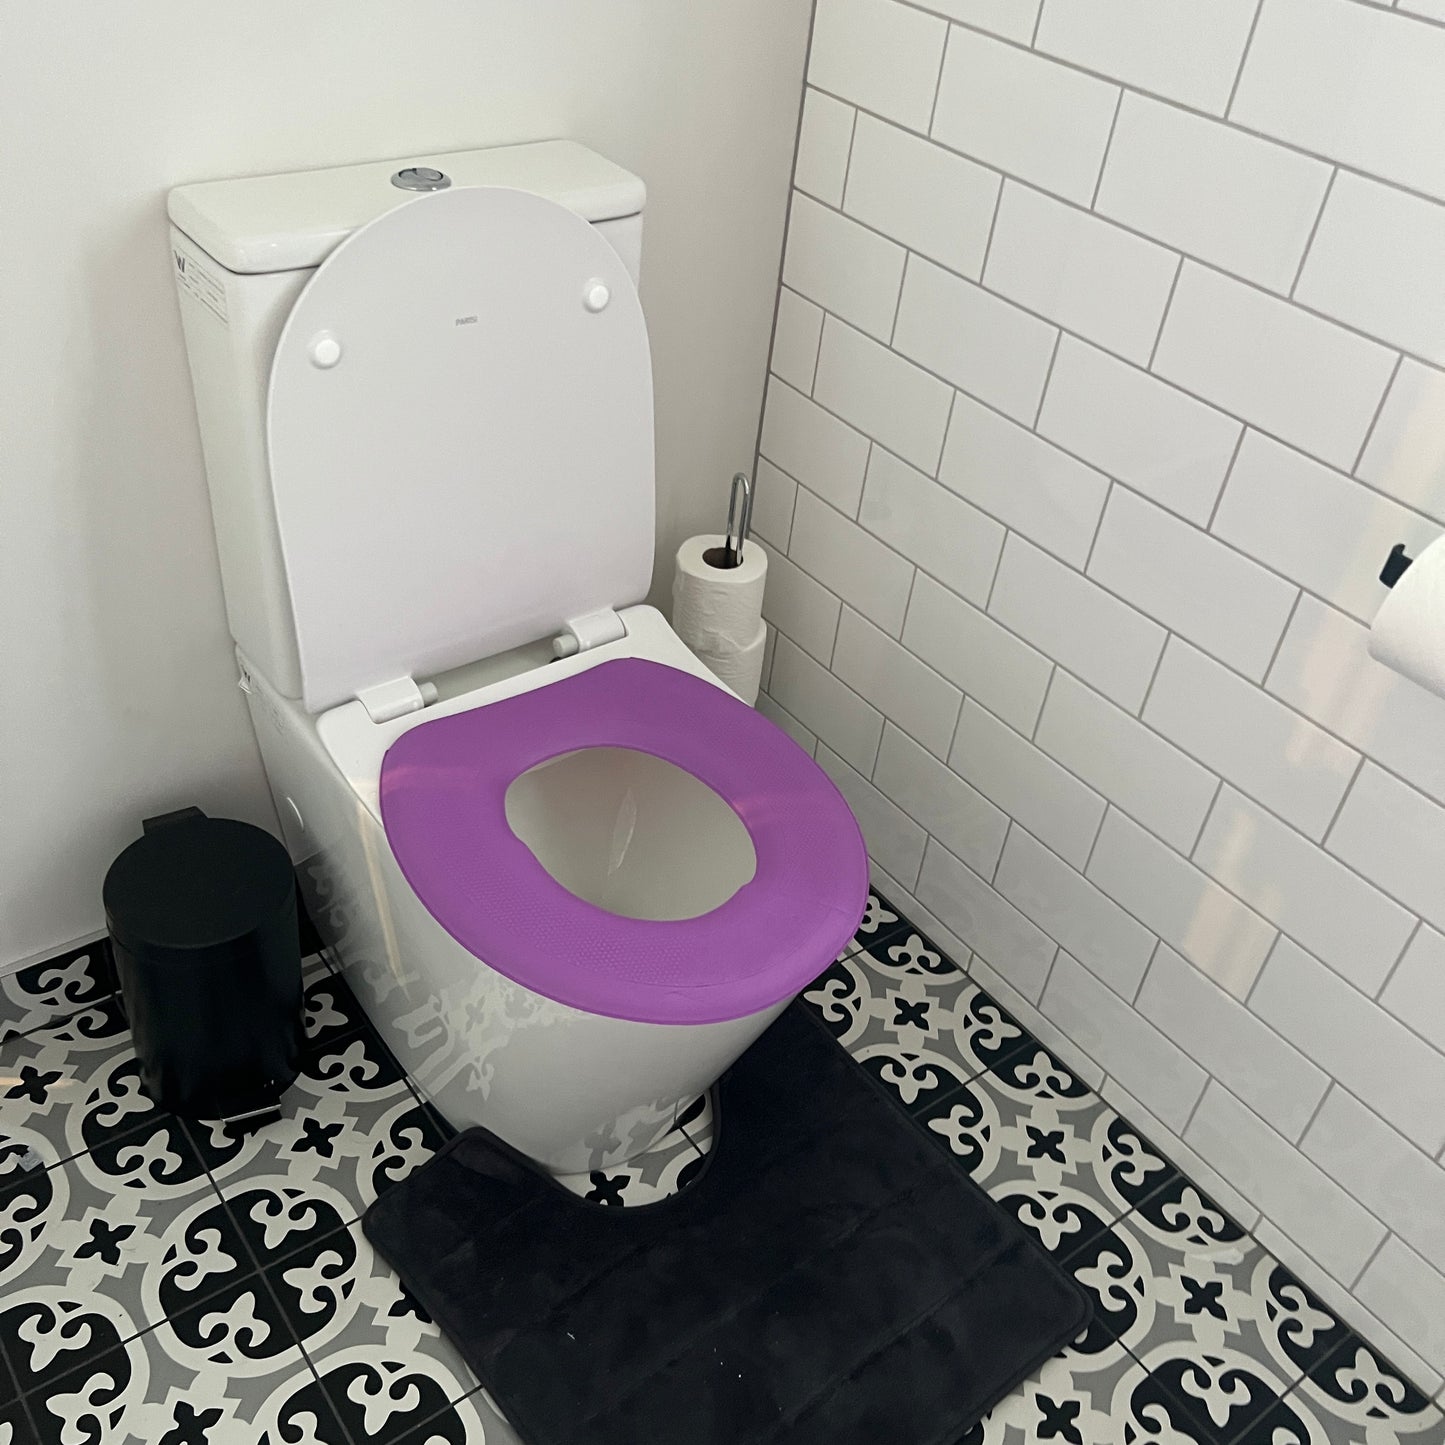 Padded Toilet Seat Identifying Cover Toilet Seat Covers SPIRIT SPARKPLUGS   